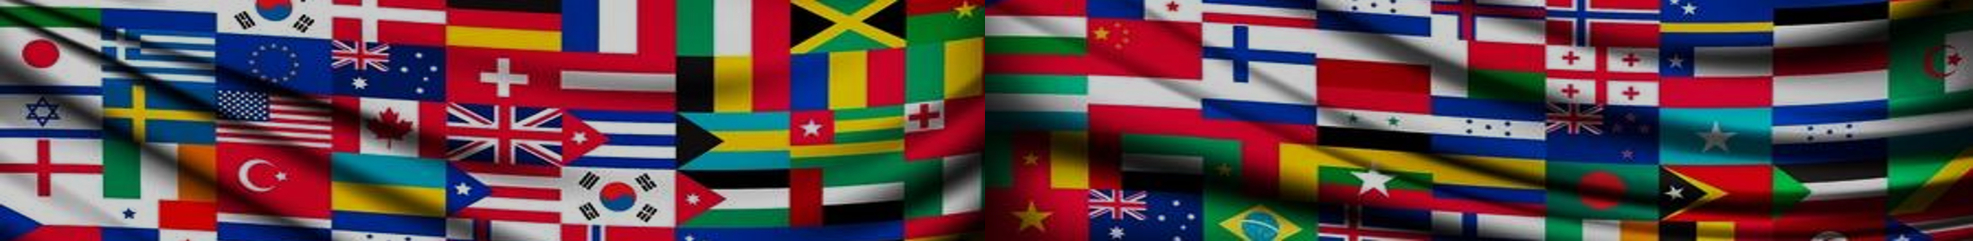 World Flags Dull